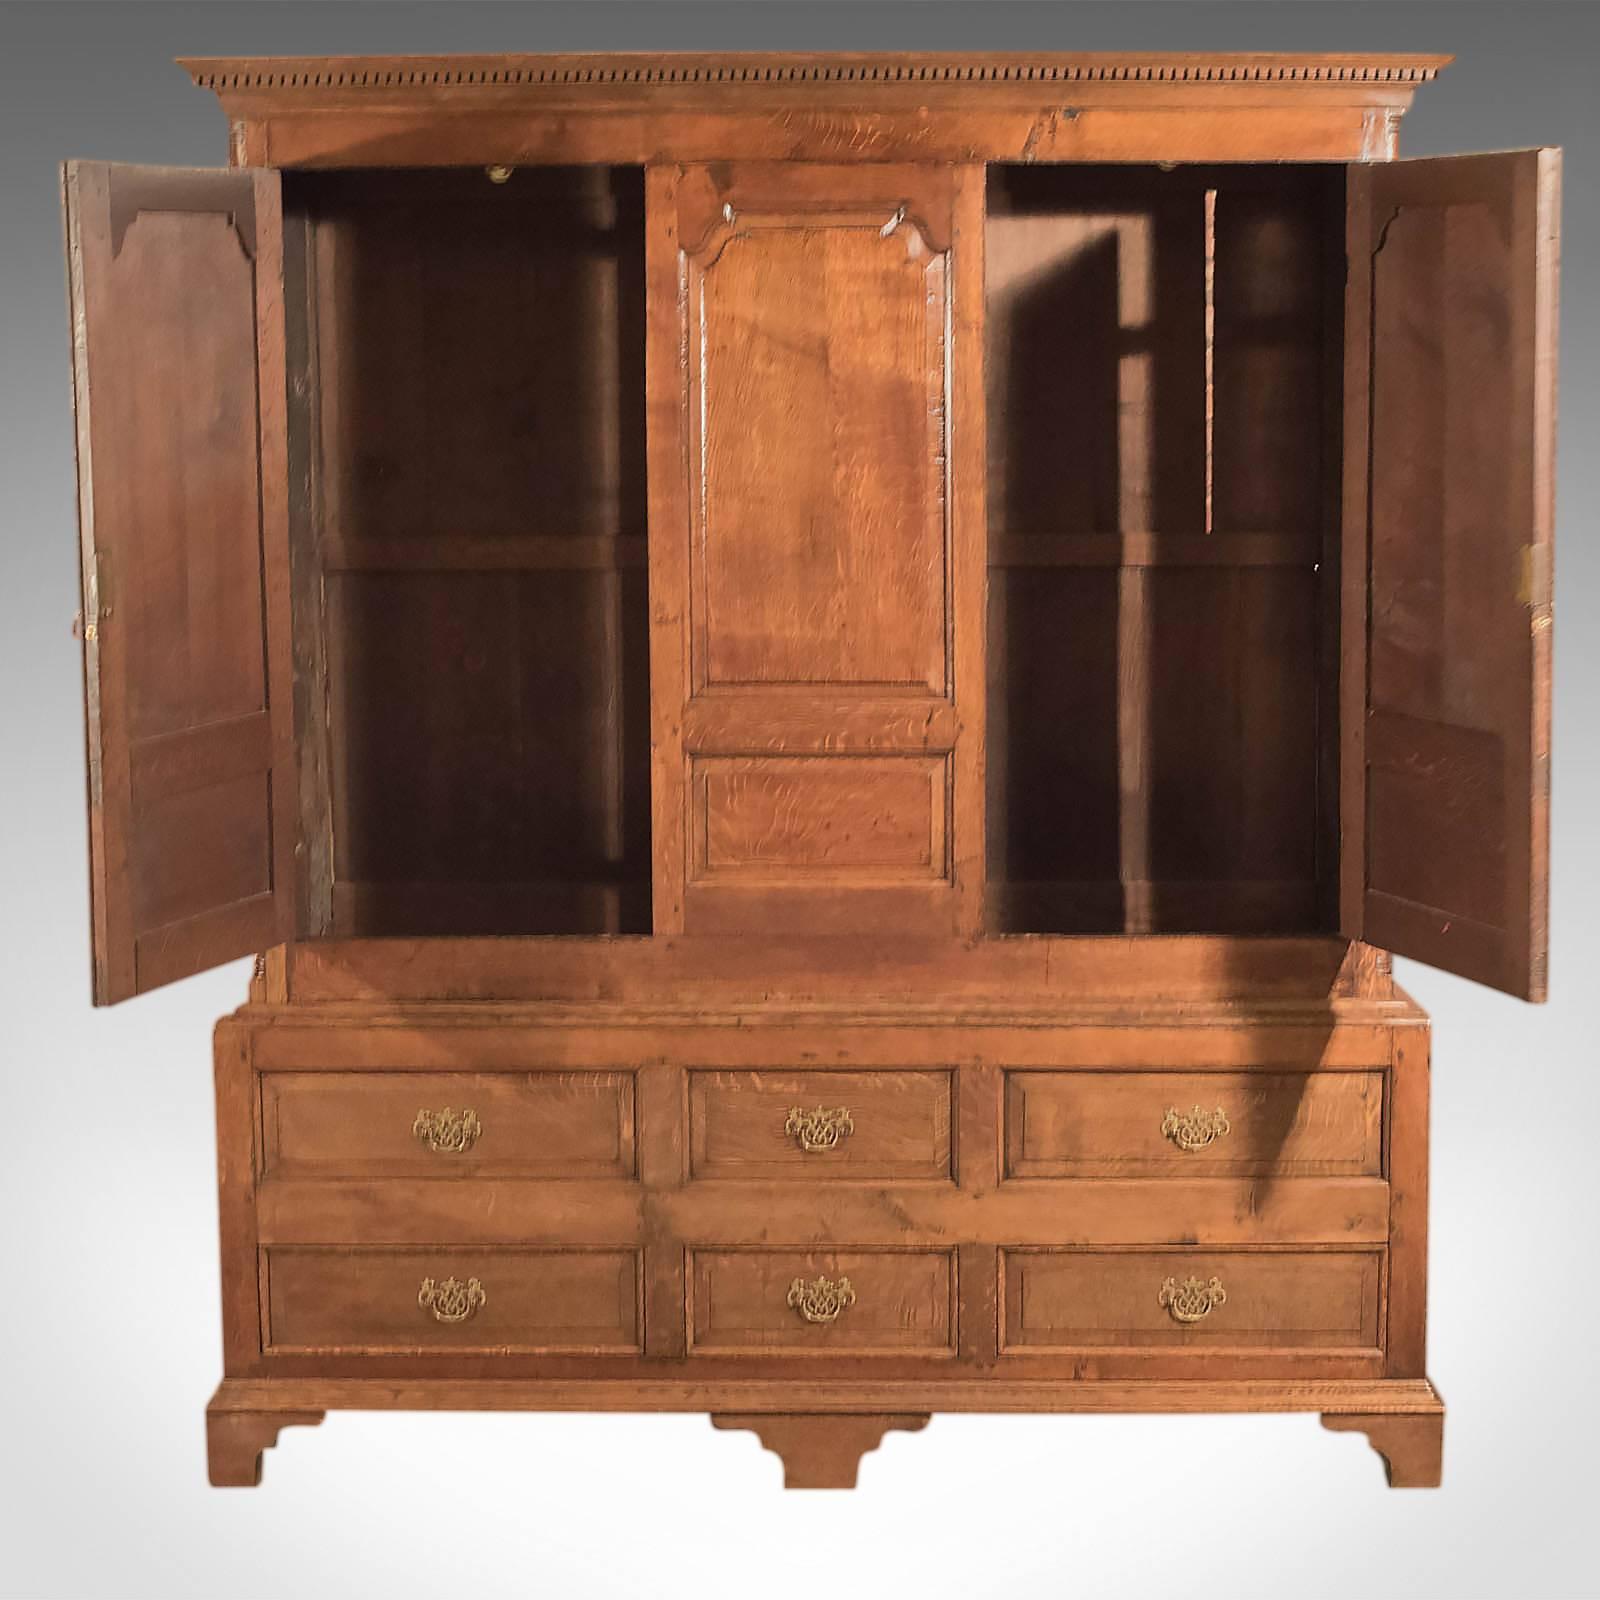 This is an antique, Georgian, vernacular wardrobe on stand dating to circa 1800.

A superior example, the proportions of this cabinet are as delightful as the aged oak that glows in a warm, waxed, russet finish displaying modularly rays and